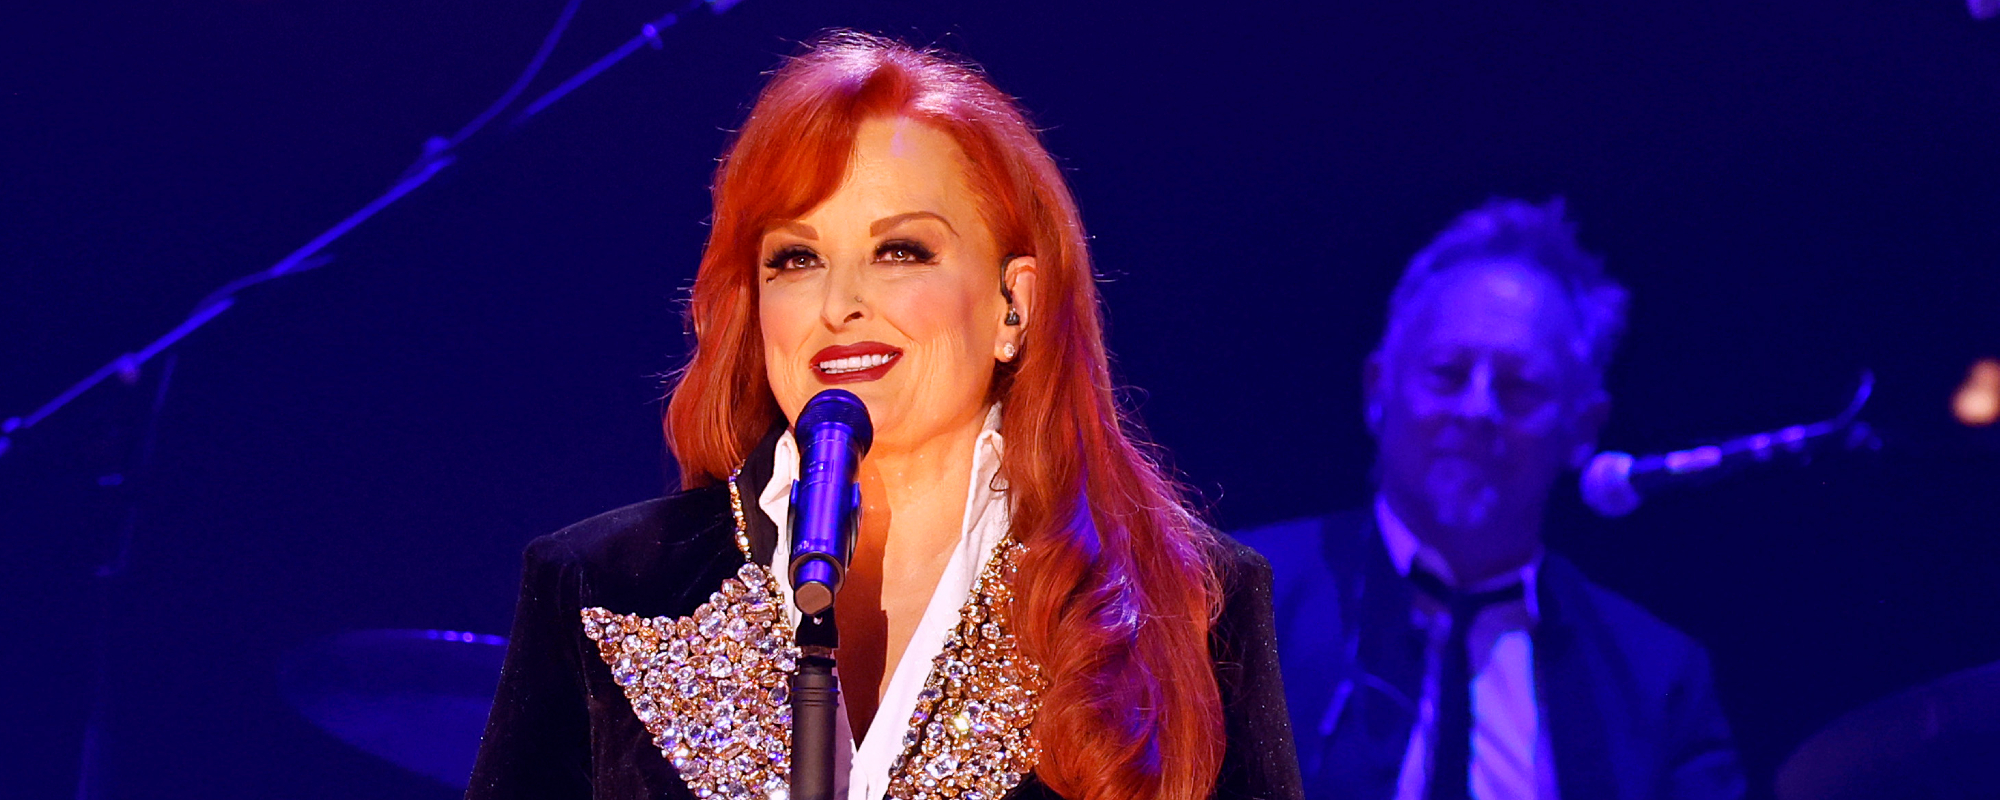 Wynonna Judd Shares Her Nerves and Excitement About Performing the National Anthem at the Kentucky Derby